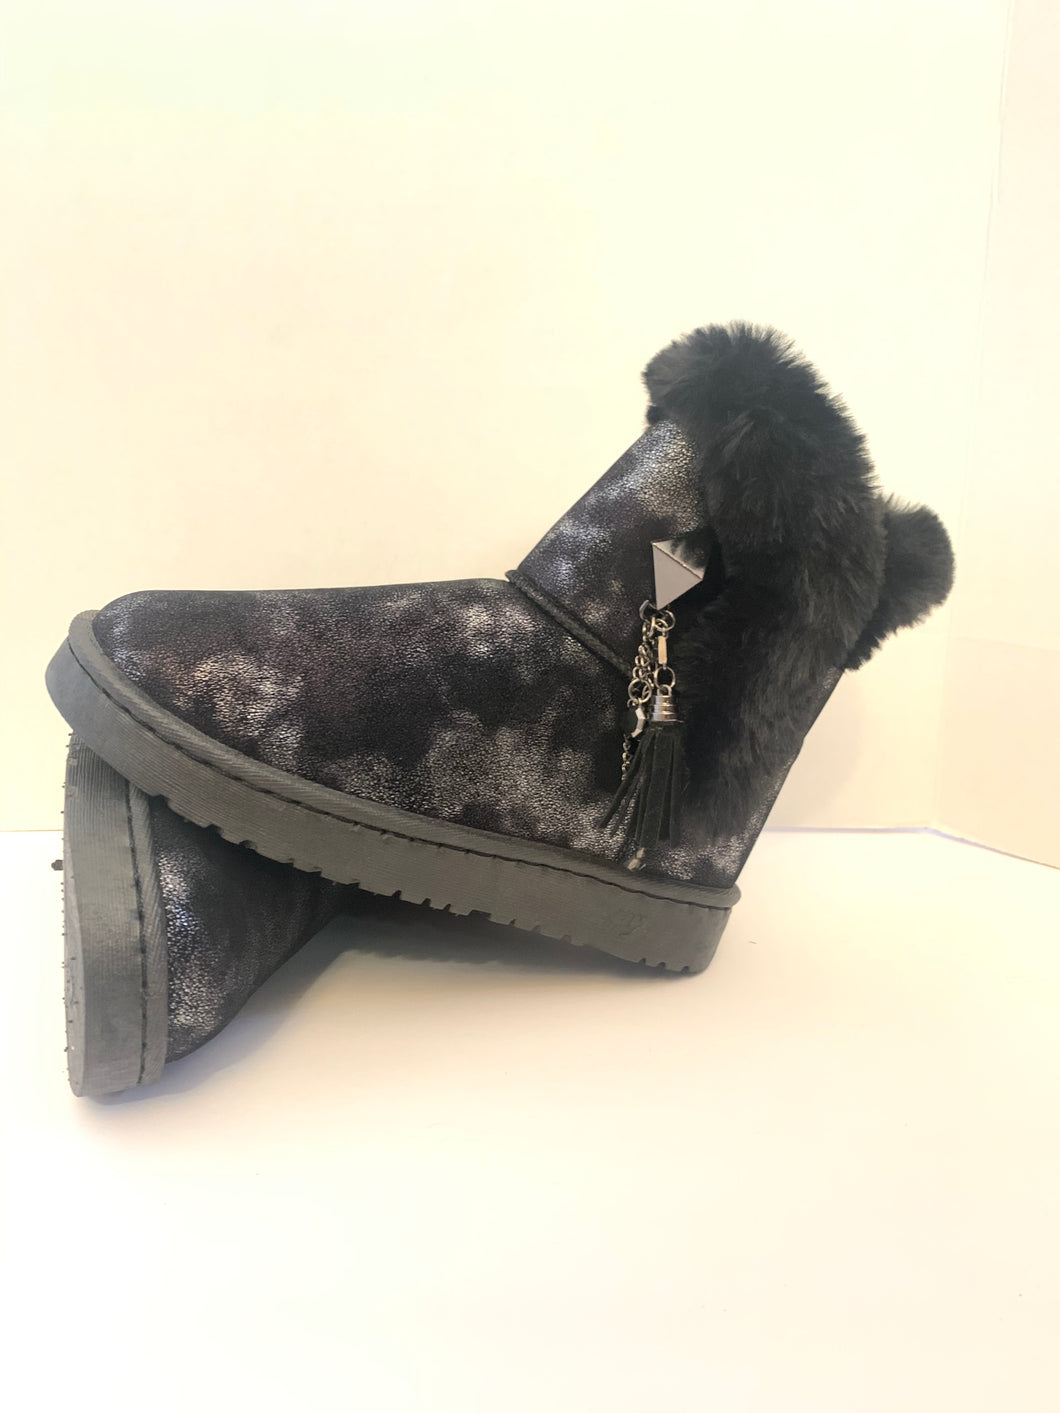 Winter Snow Boots Women's Faux Fur Suede Mid-Calf Boot Warm Fashion Casual Walking Flat Boots